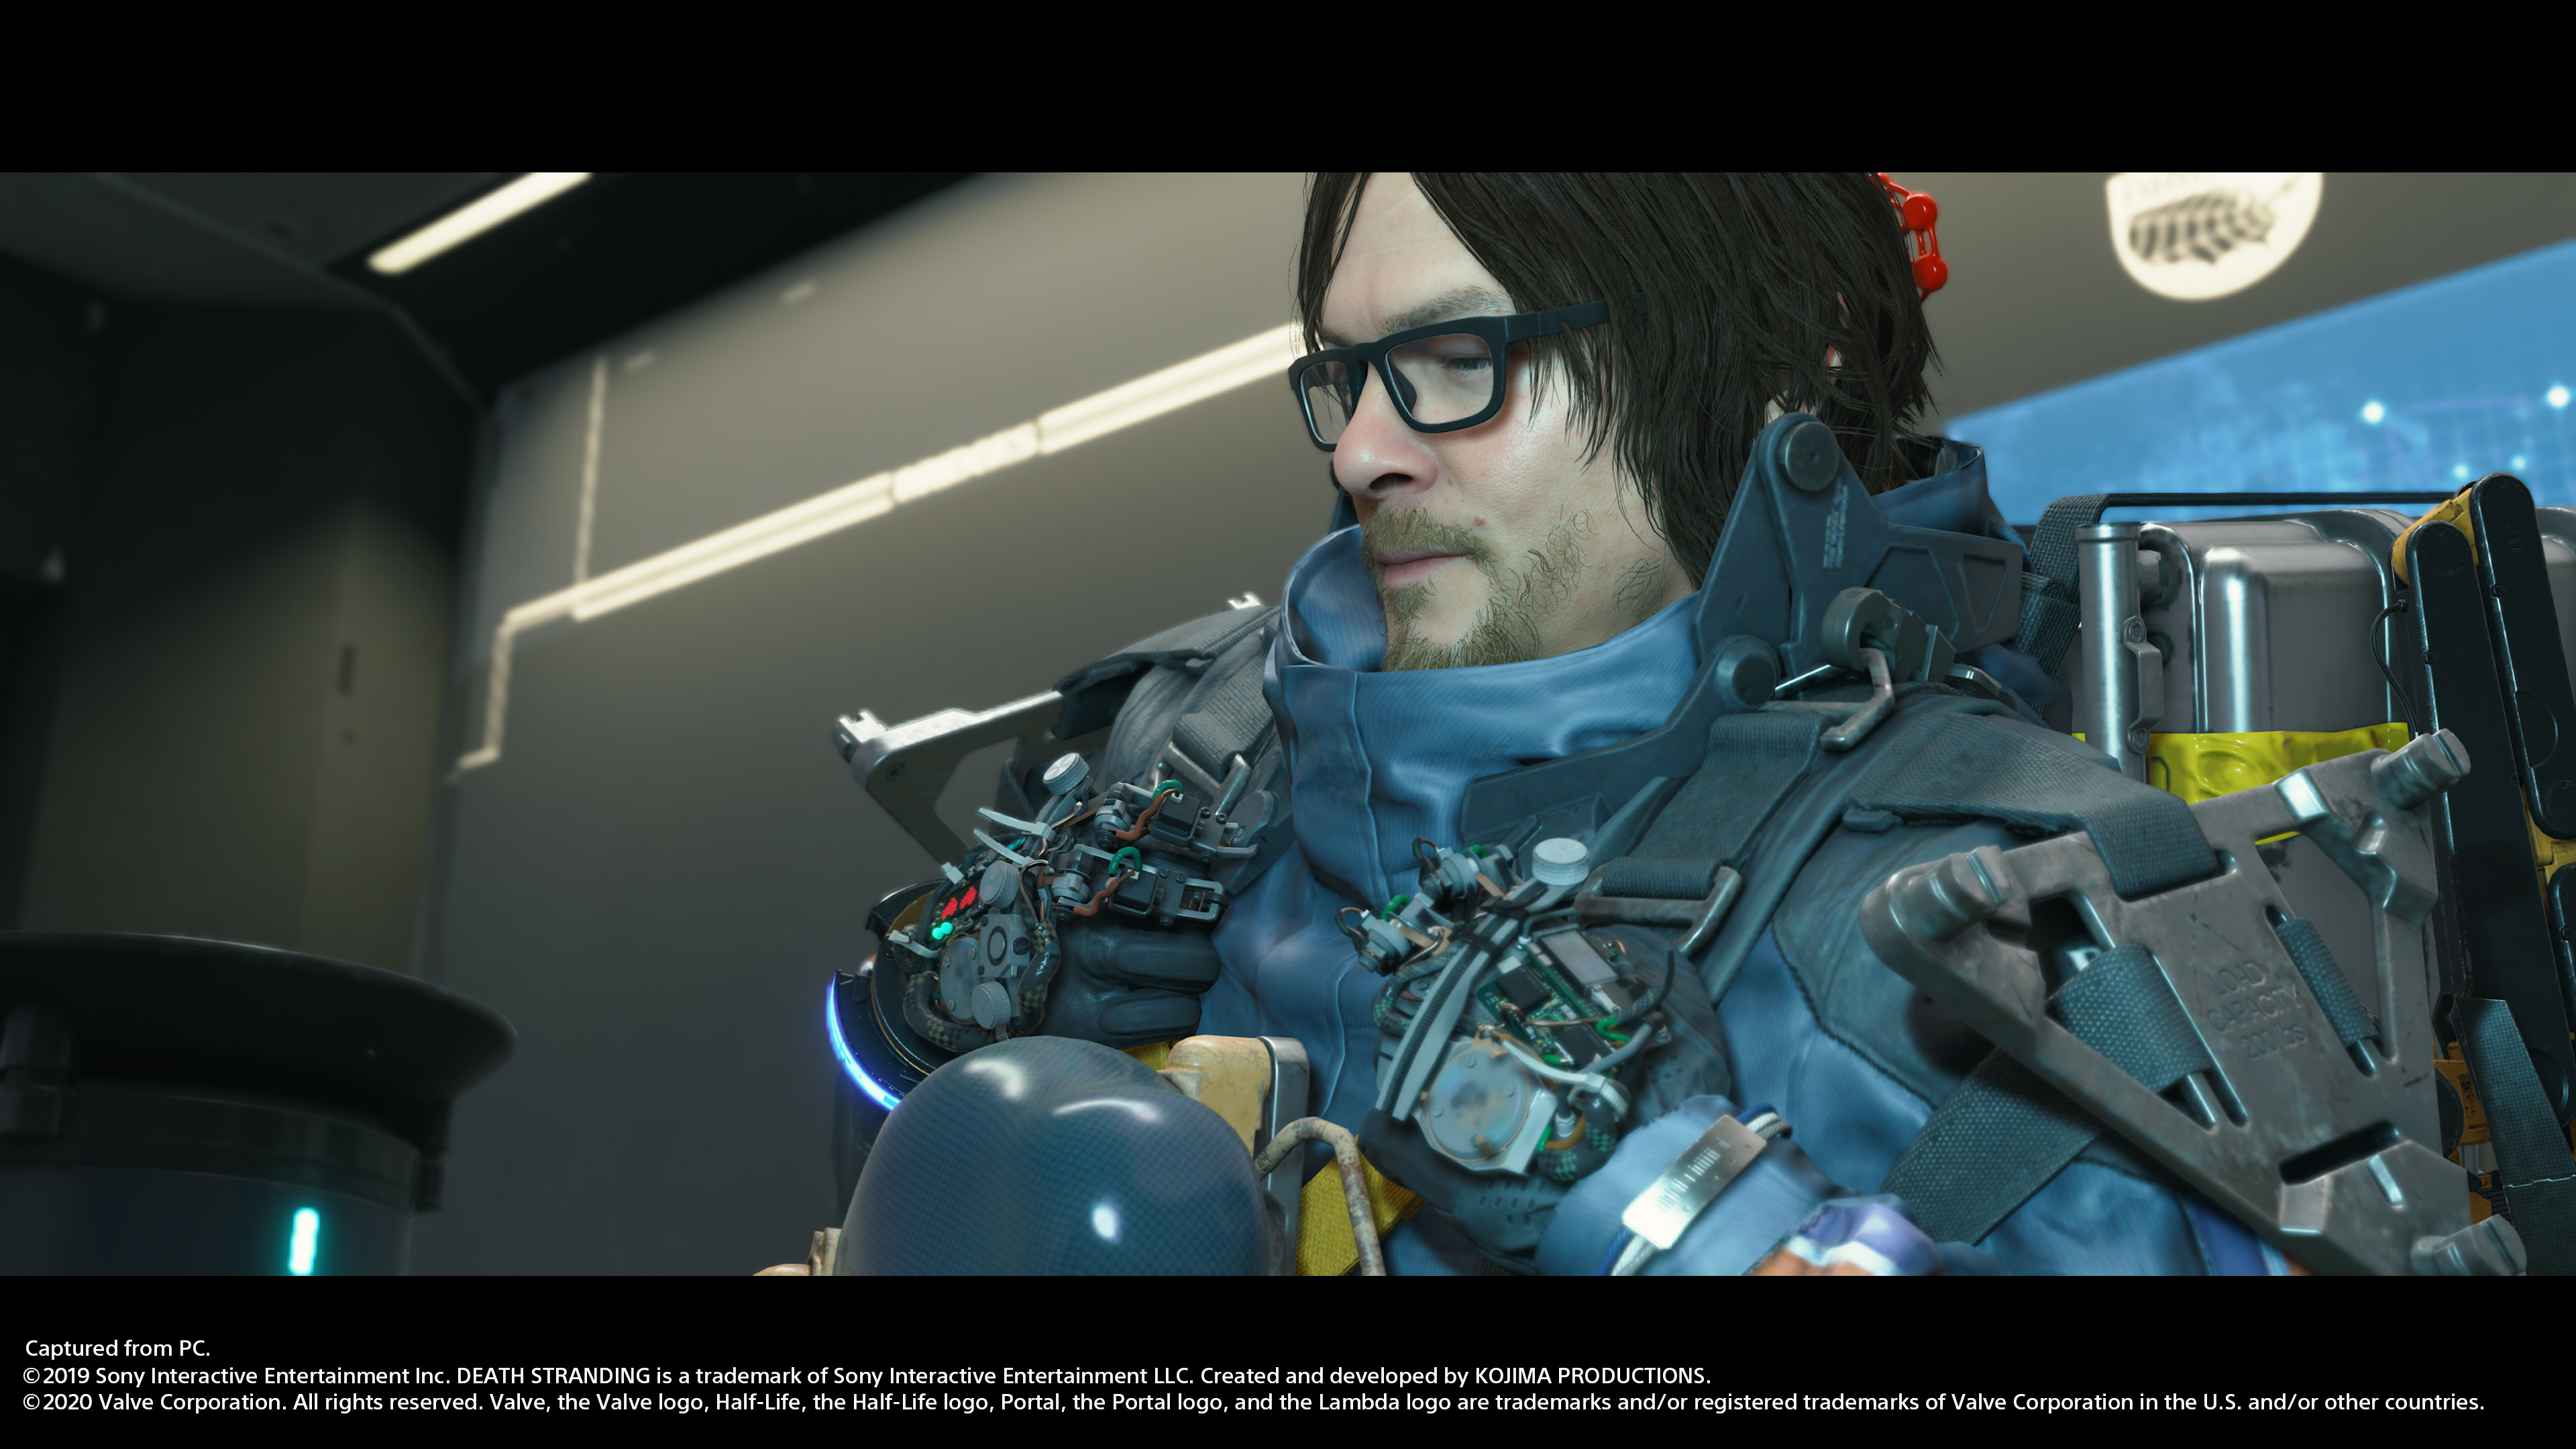 Media asset in full size related to 3dfxzone.it news item entitled as follows: AMD rilascia il driver kit Radeon Software Adrenalin 2020 Edition 20.7.2 | Image Name: news30921_Death-Stranding-Screenshot_1.jpg